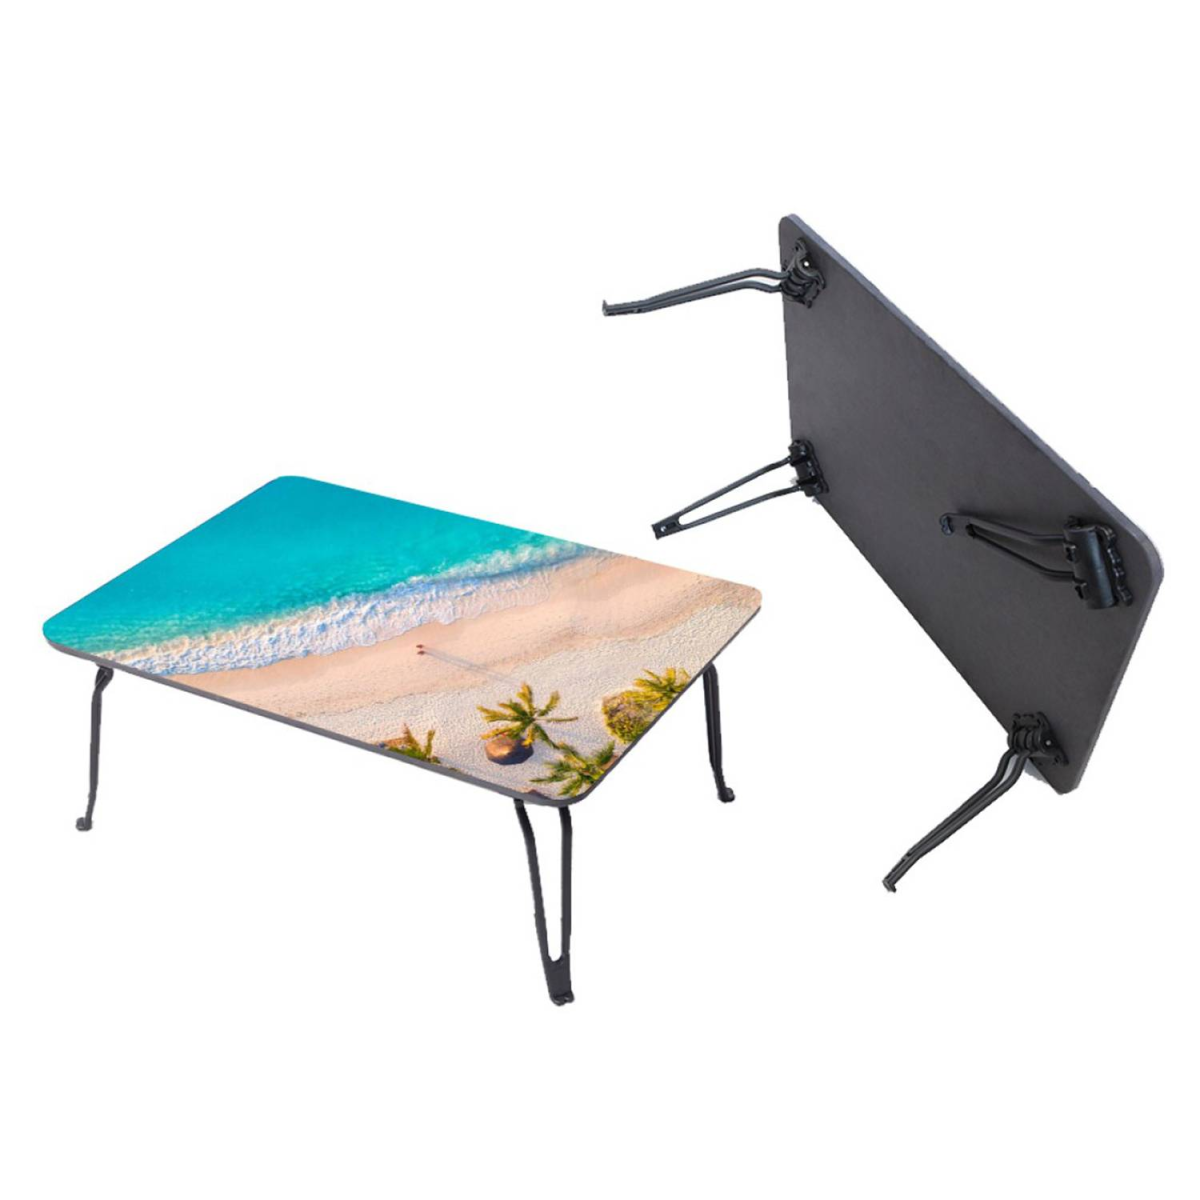 Foldable Wall Art Table - SUMMER FLAVORS EDITION ft. Getty Image